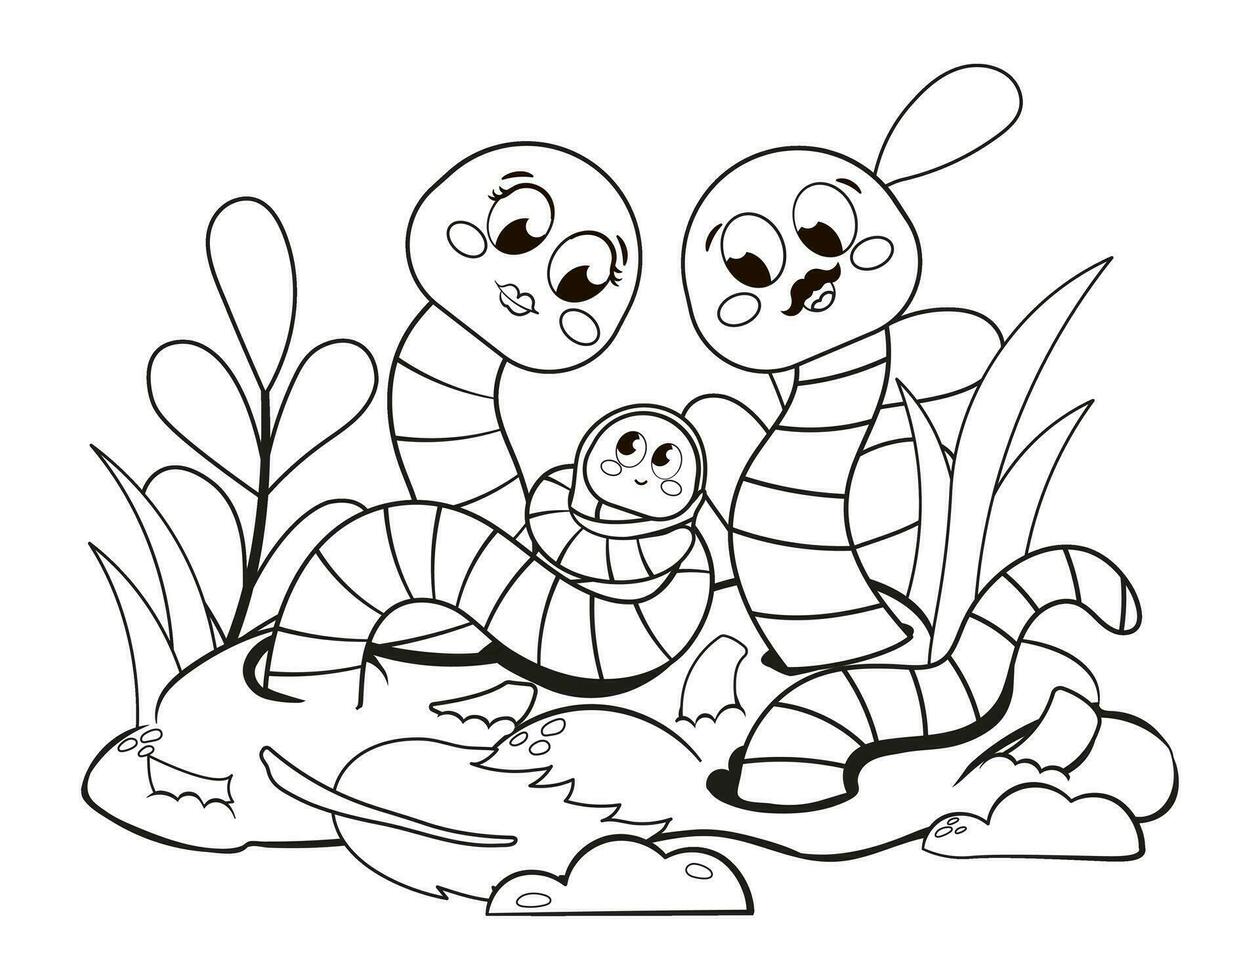 Cute printable coloring page for kids with cartoon earthworm family characters holding newborn and sitting on the ground vector